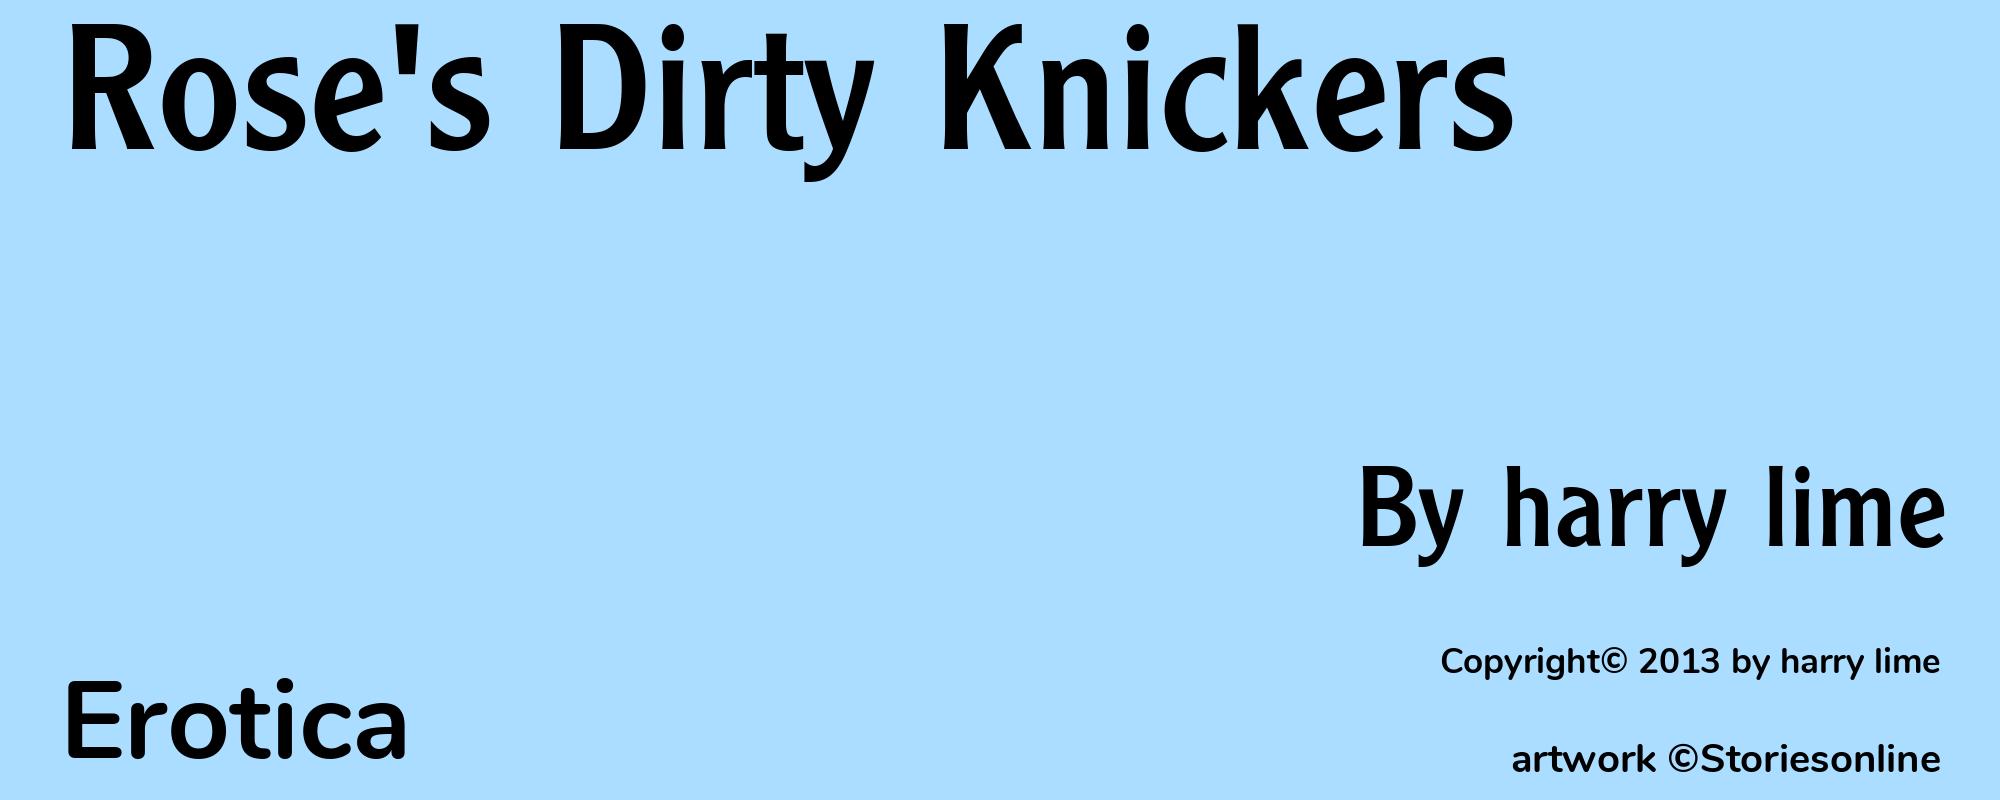 Rose's Dirty Knickers - Cover